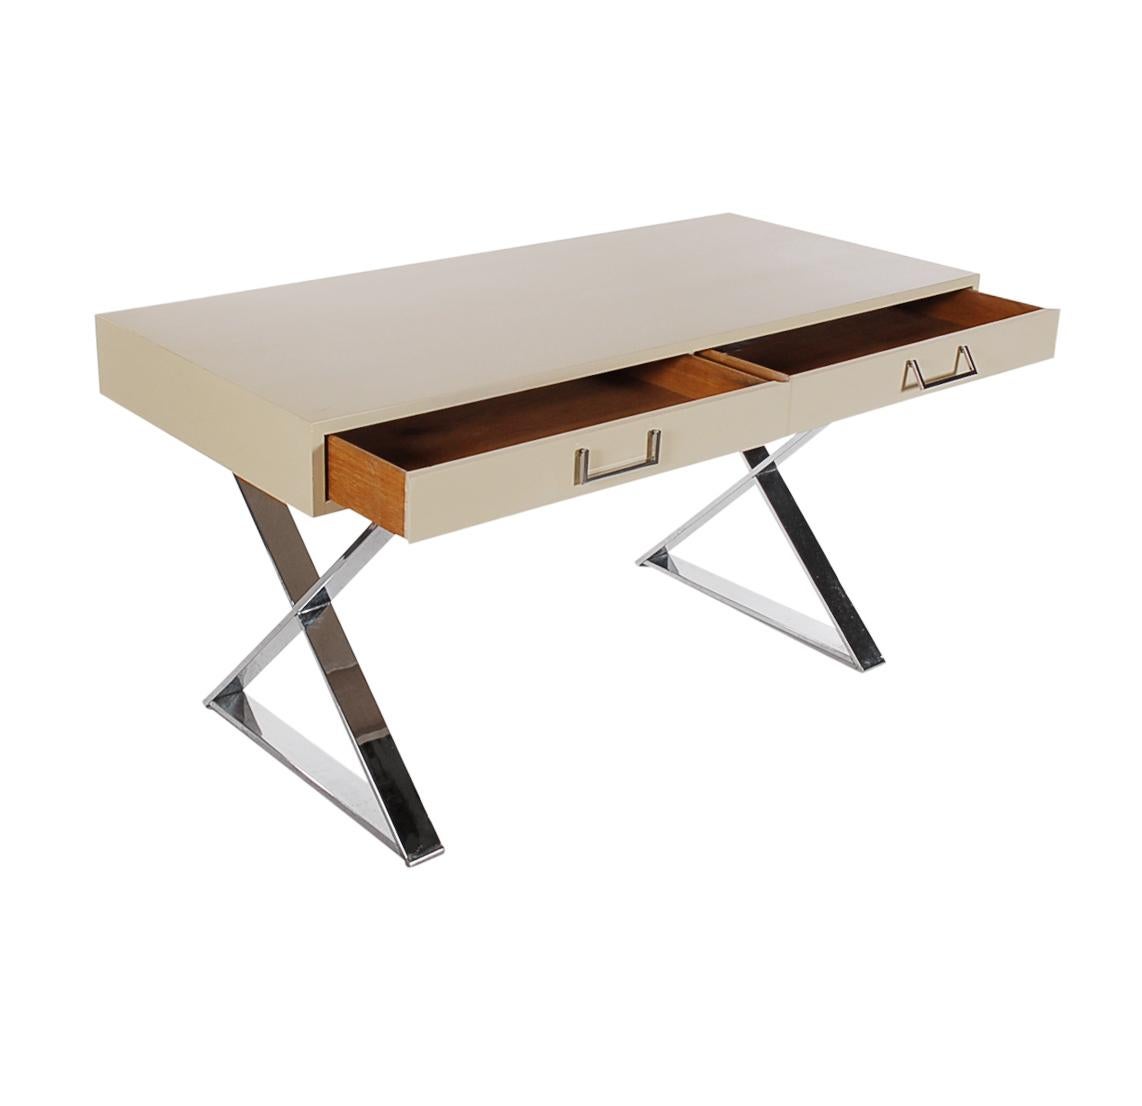 American Mid-Century Modern X-Base Campaign Desk by Milo Baughman in Off-White Lacquer